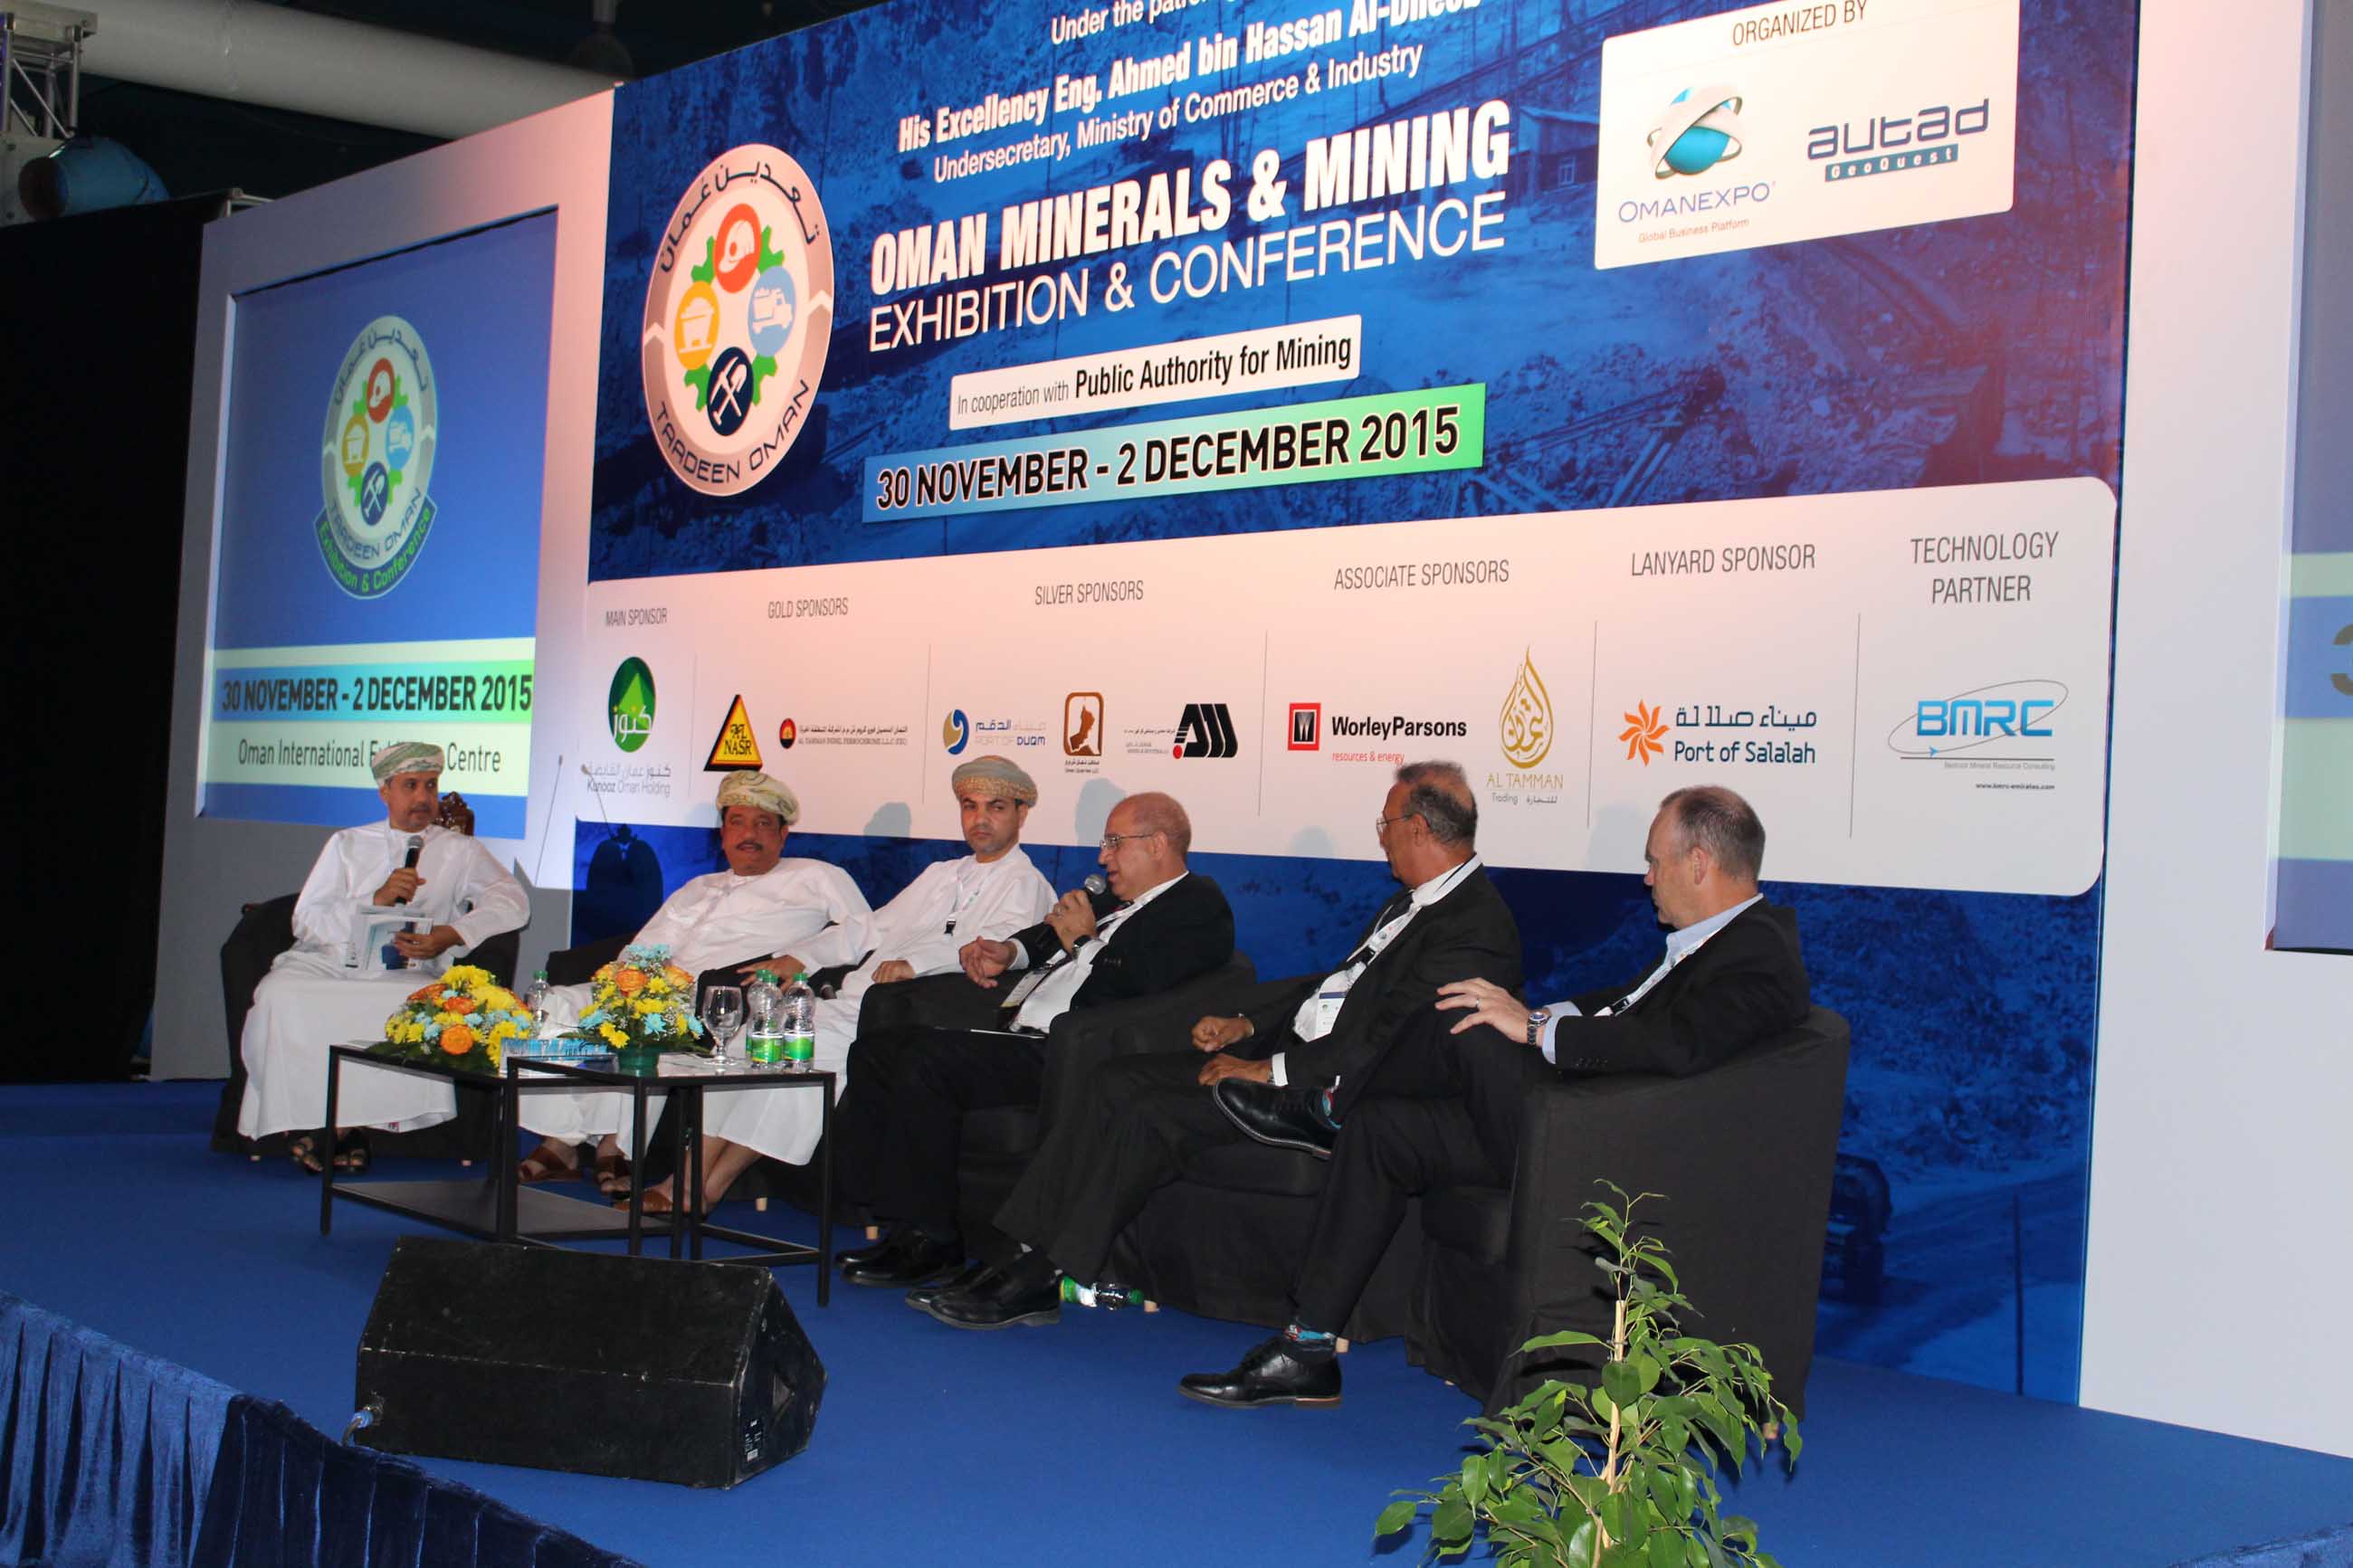 Mining event presents investment opportunities for the sector